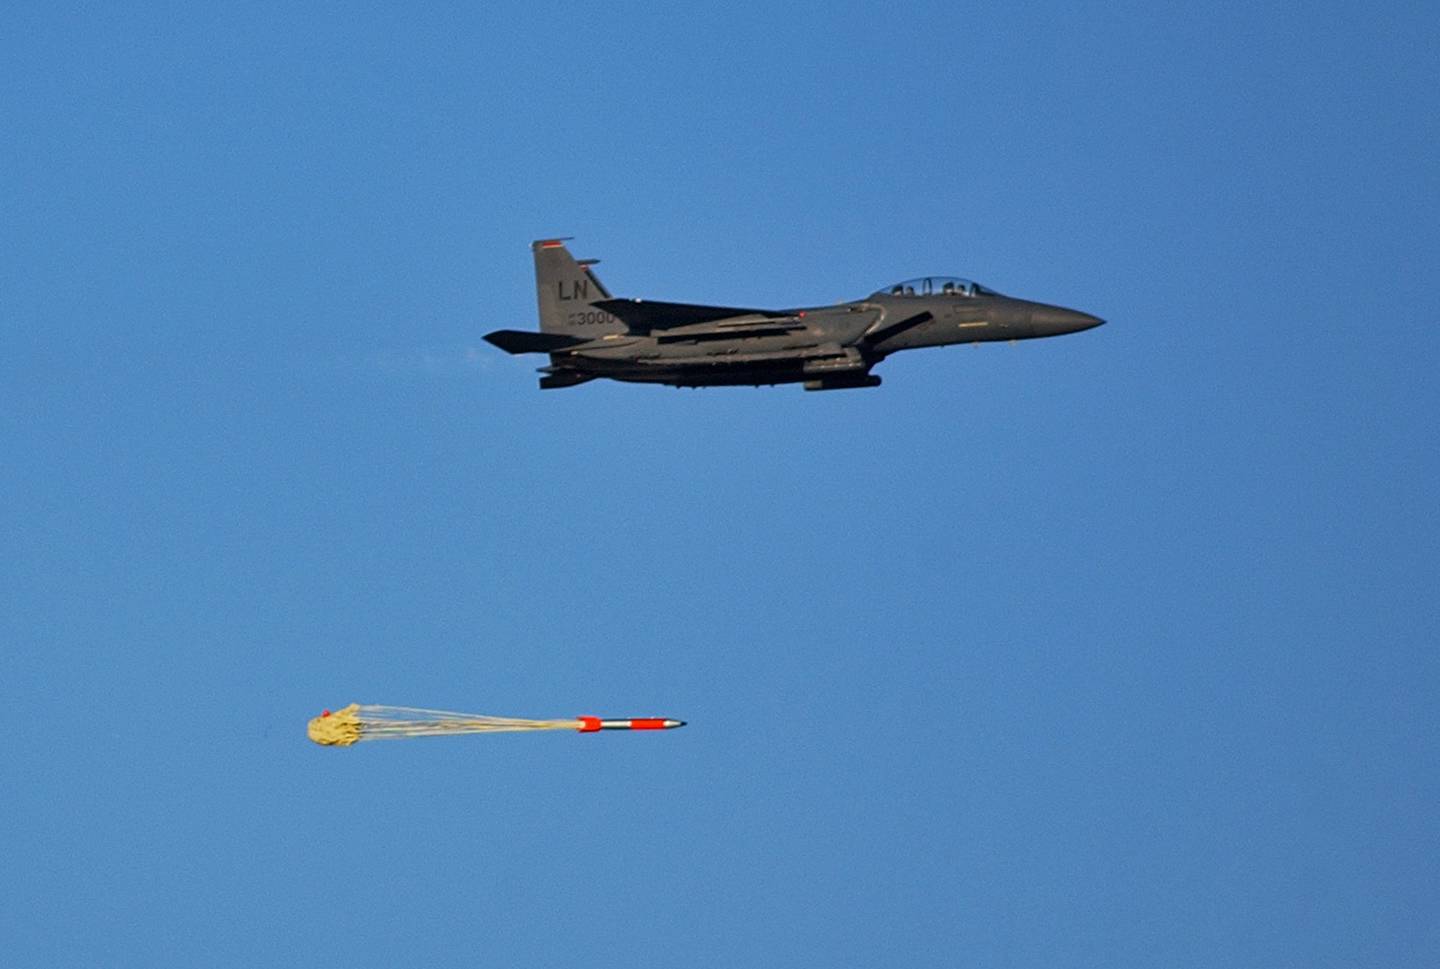 In this undated photo, a joint test assembly undergoes a flight test at Sandia National Laboratories’ Tonopah Test Range in Nevada. The Air Force Nuclear Weapons Center received formal approval in late October 2018 to enter the production phase for the B61-12 nuclear gravity bomb’s new guided tail-kit assembly, or TKA. The Air Force is responsible for the B61-12 TKA, joint integration of the bomb assembly and TKA into the “all-up-round” of the weapon, and its integration with aircraft. (Air Force)